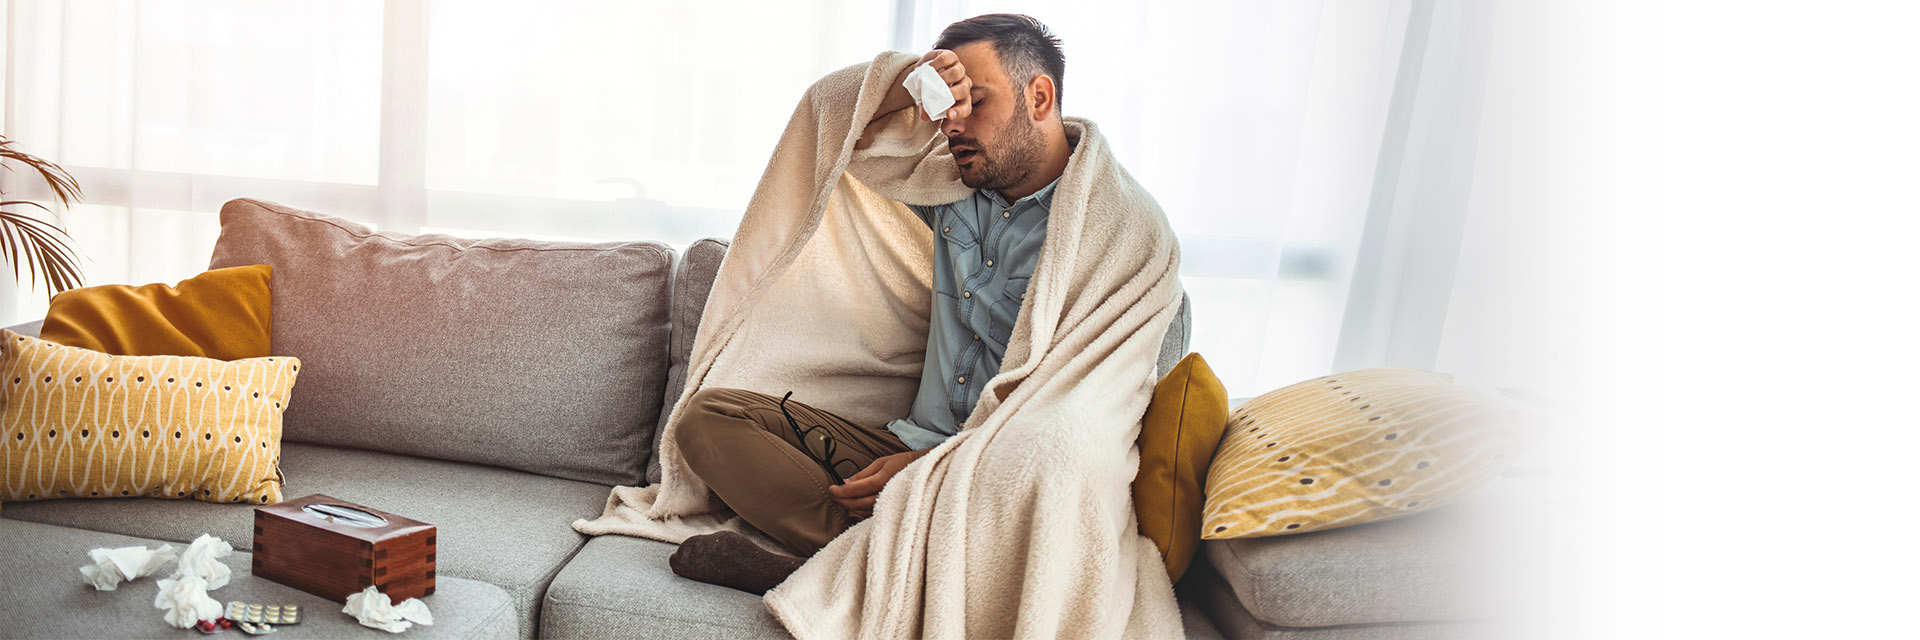 sick man wrapped in blanket on couch